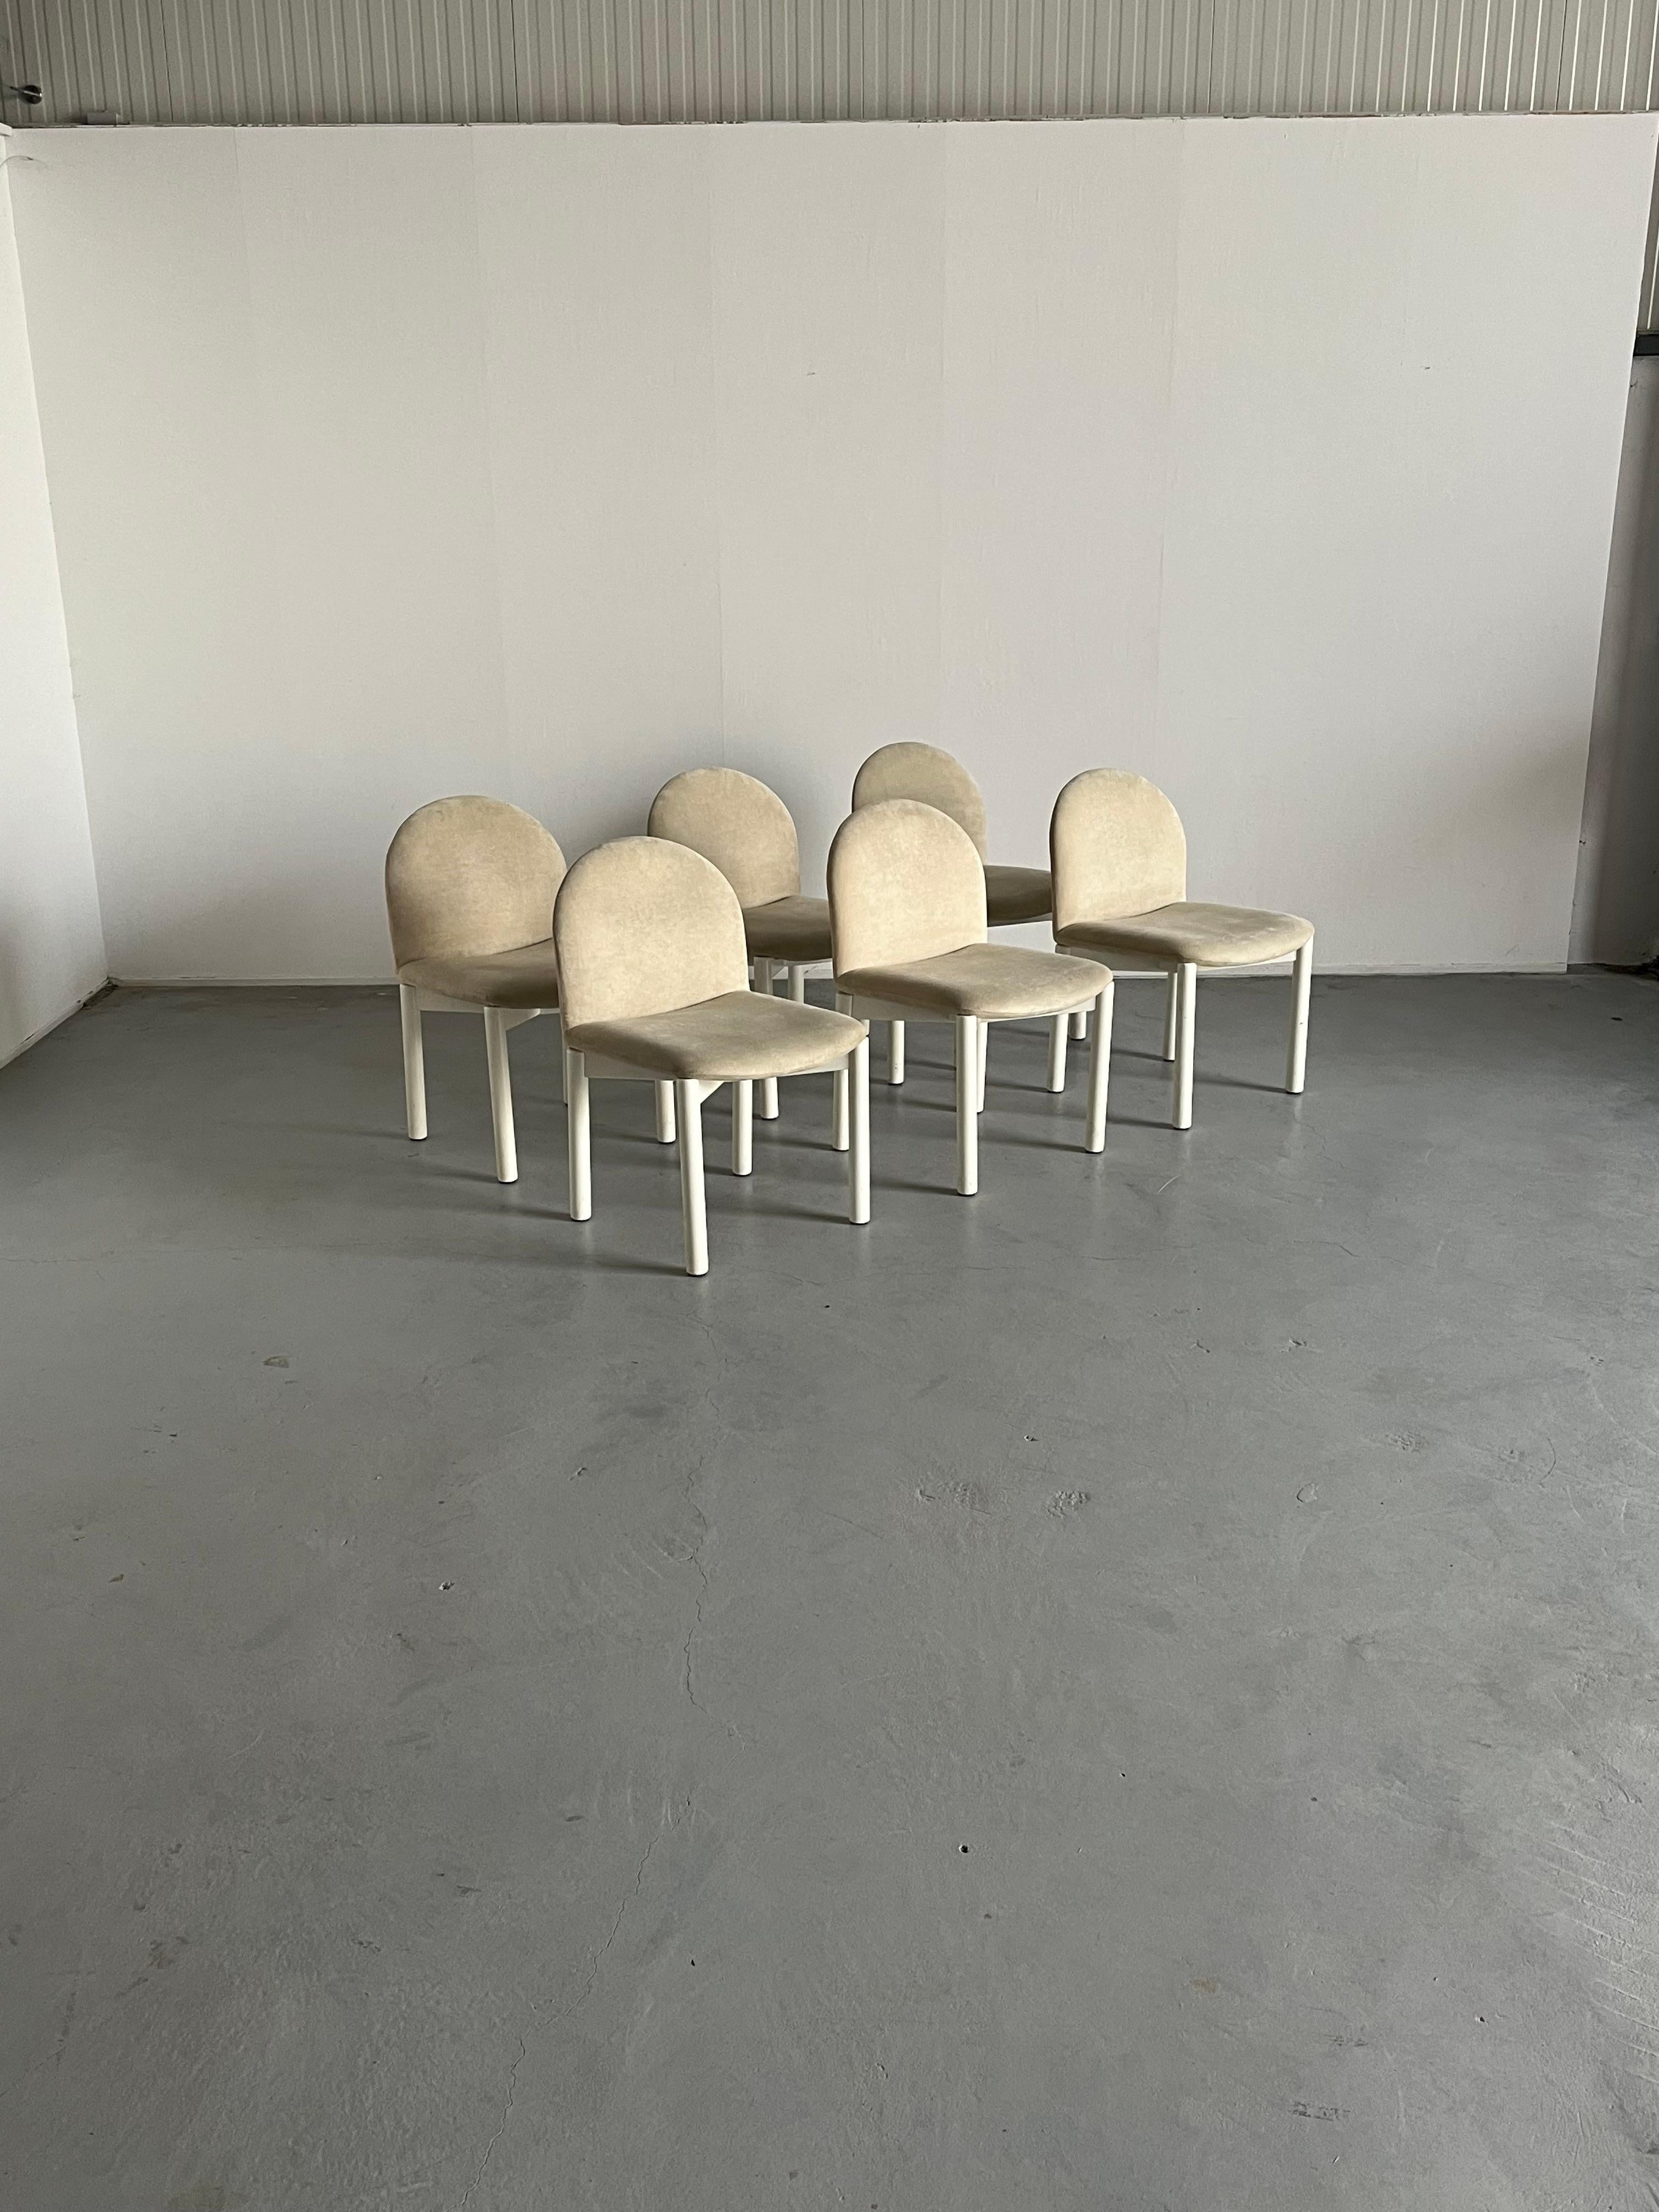 Late 20th Century Set of 6 Mid-Century Modern 'Combra' Dining Chairs by Cor, 1980s Germany